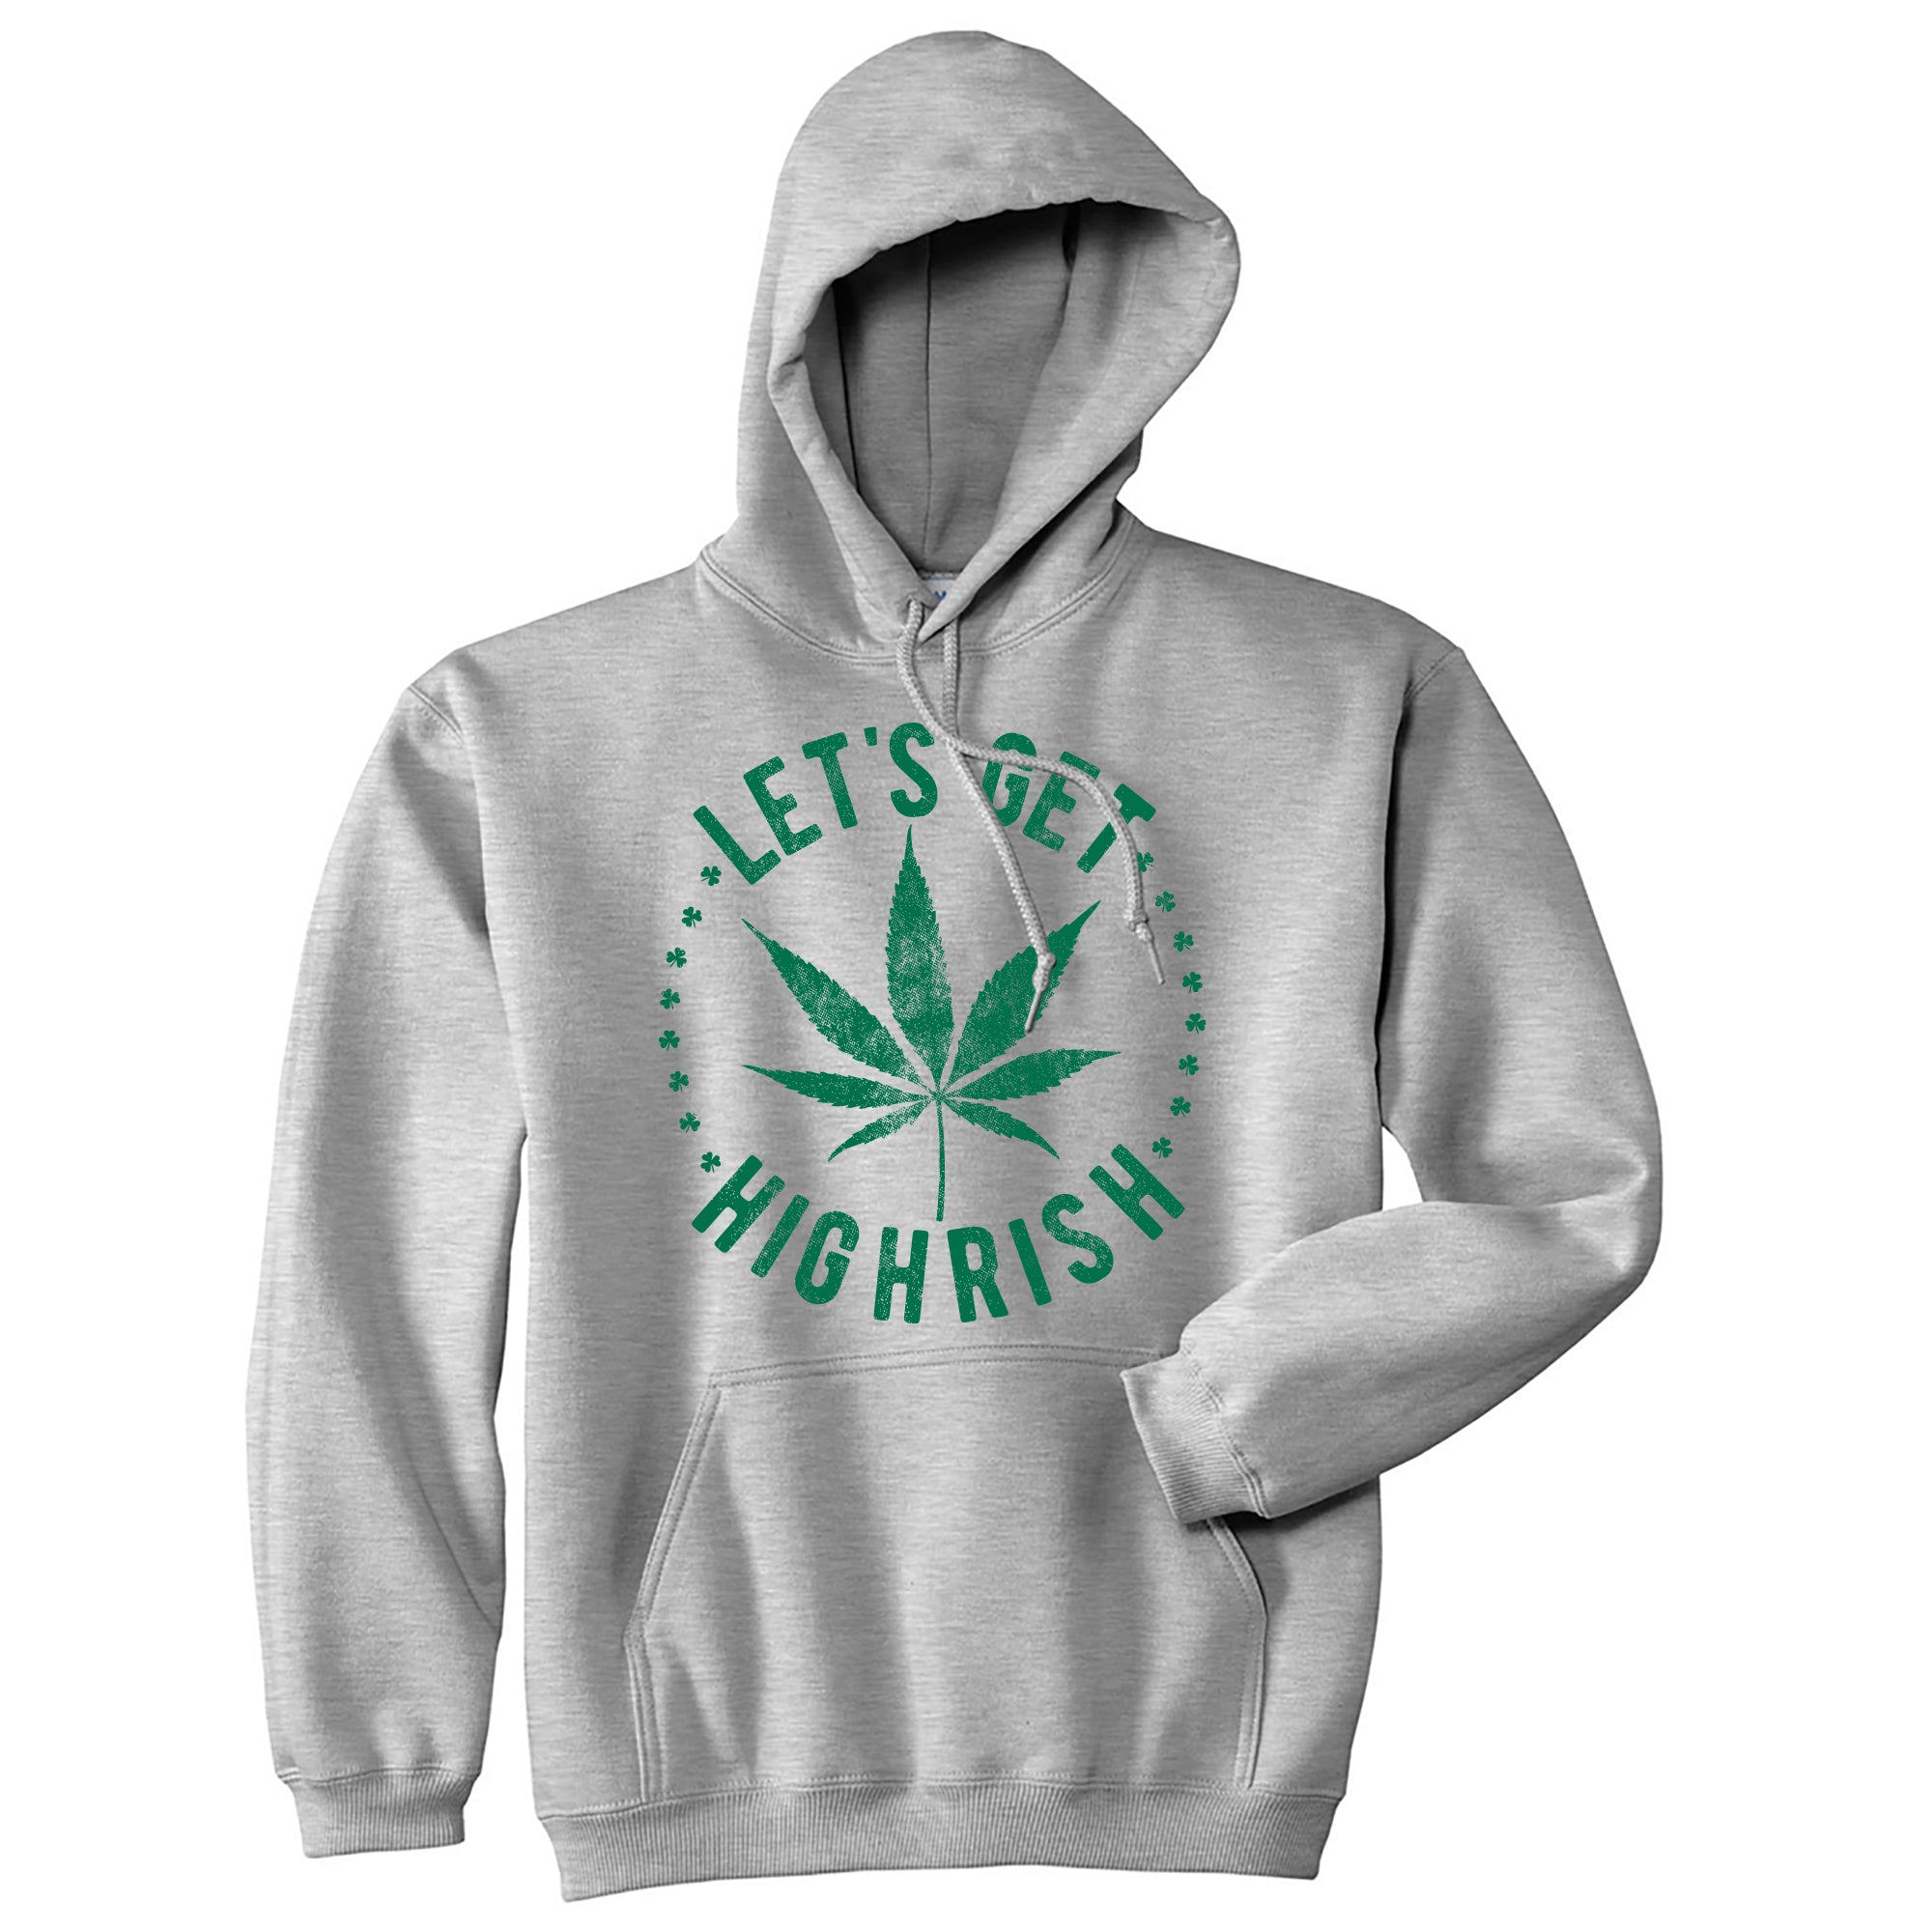 Funny Light Heather Grey Let's Get Highrish Hoodie Nerdy Saint Patrick's Day 420 Tee